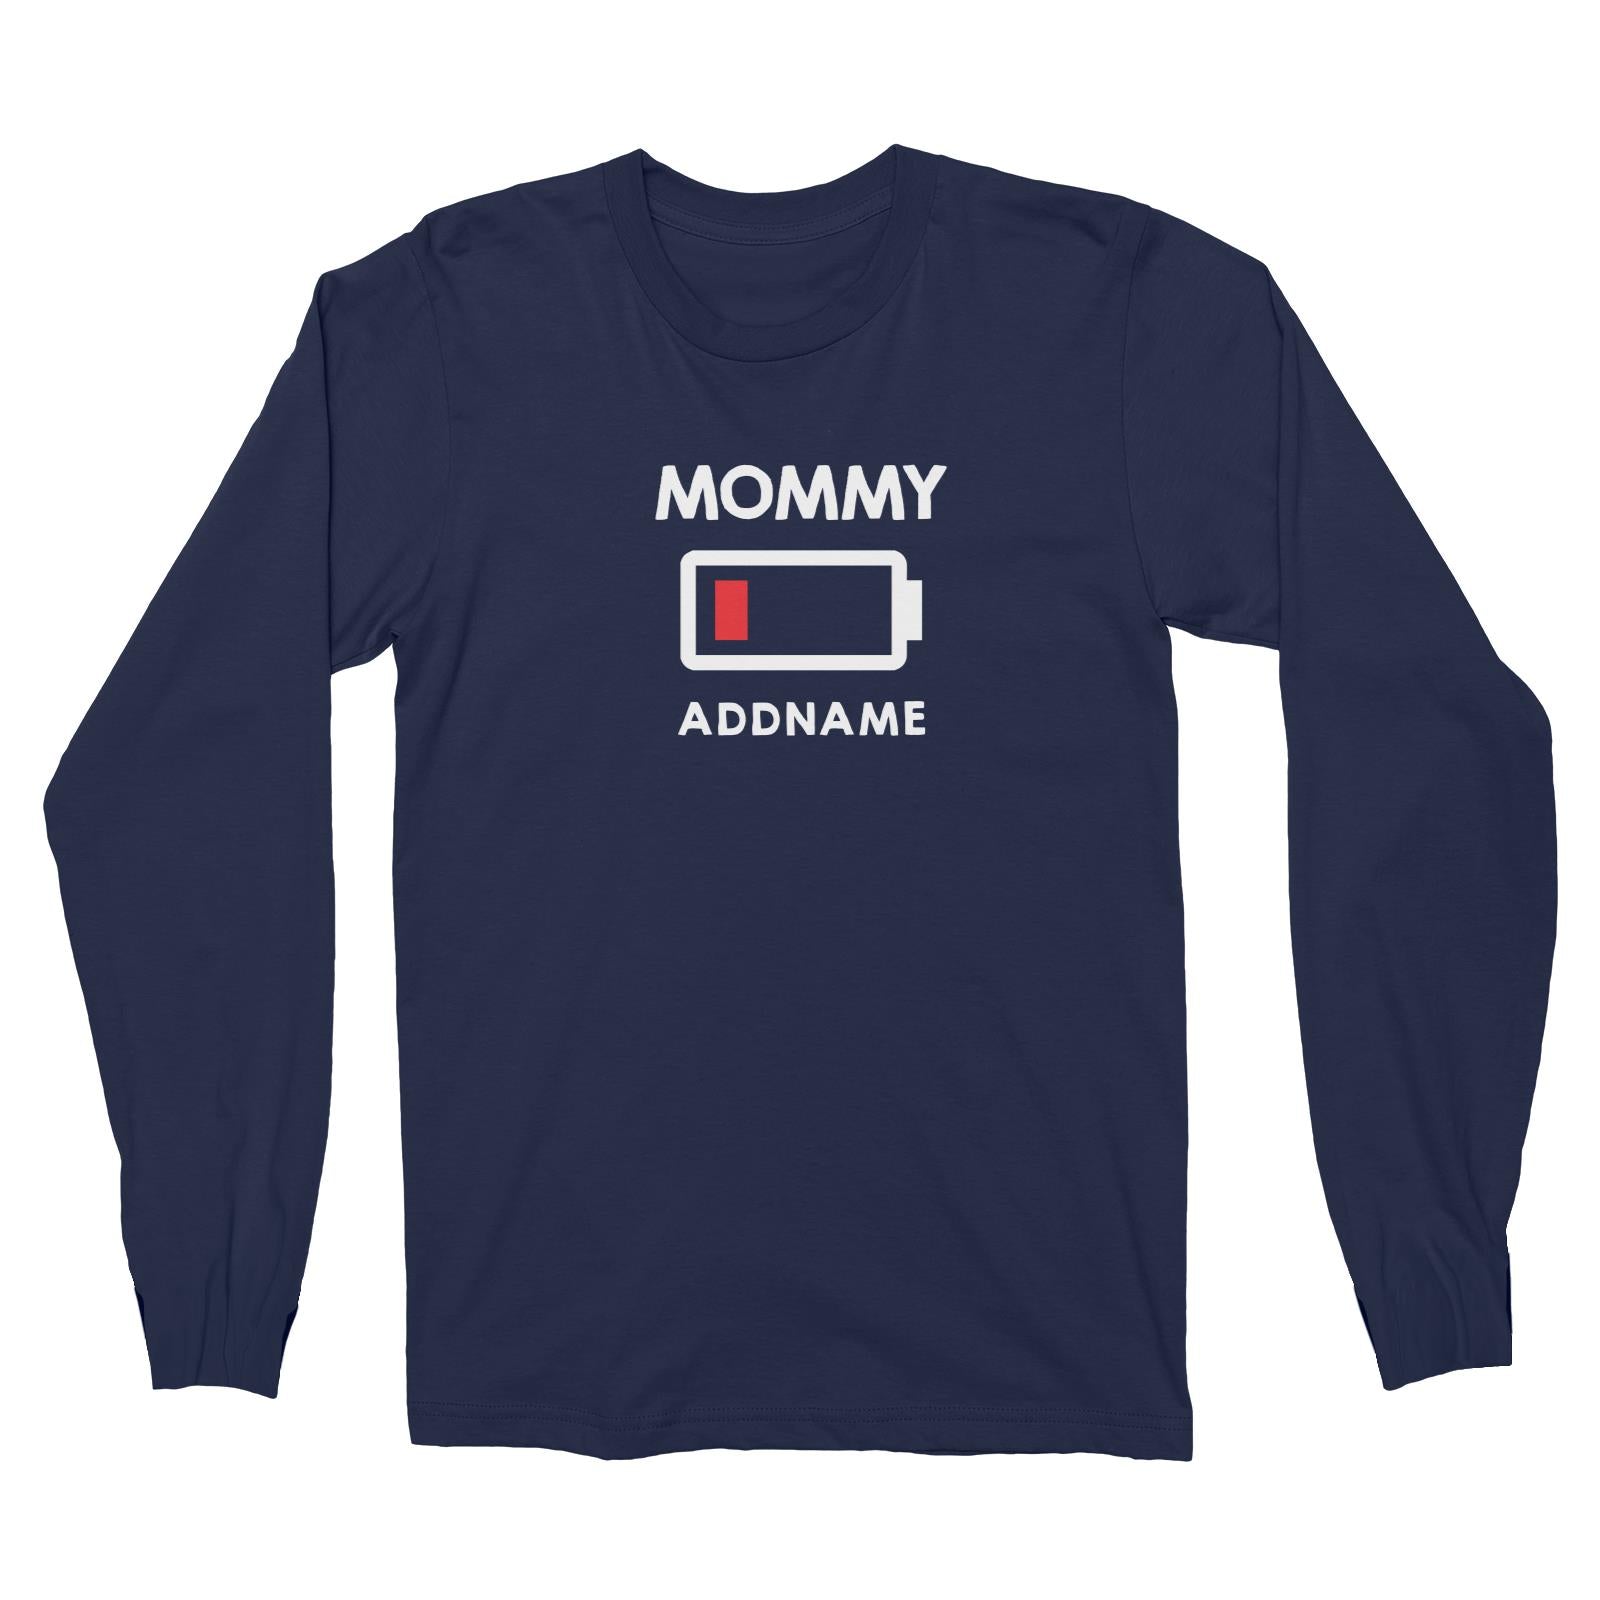 Battery Low Mommy Addname Long Sleeve Unisex T-Shirt  Matching Family Personalizable Designs